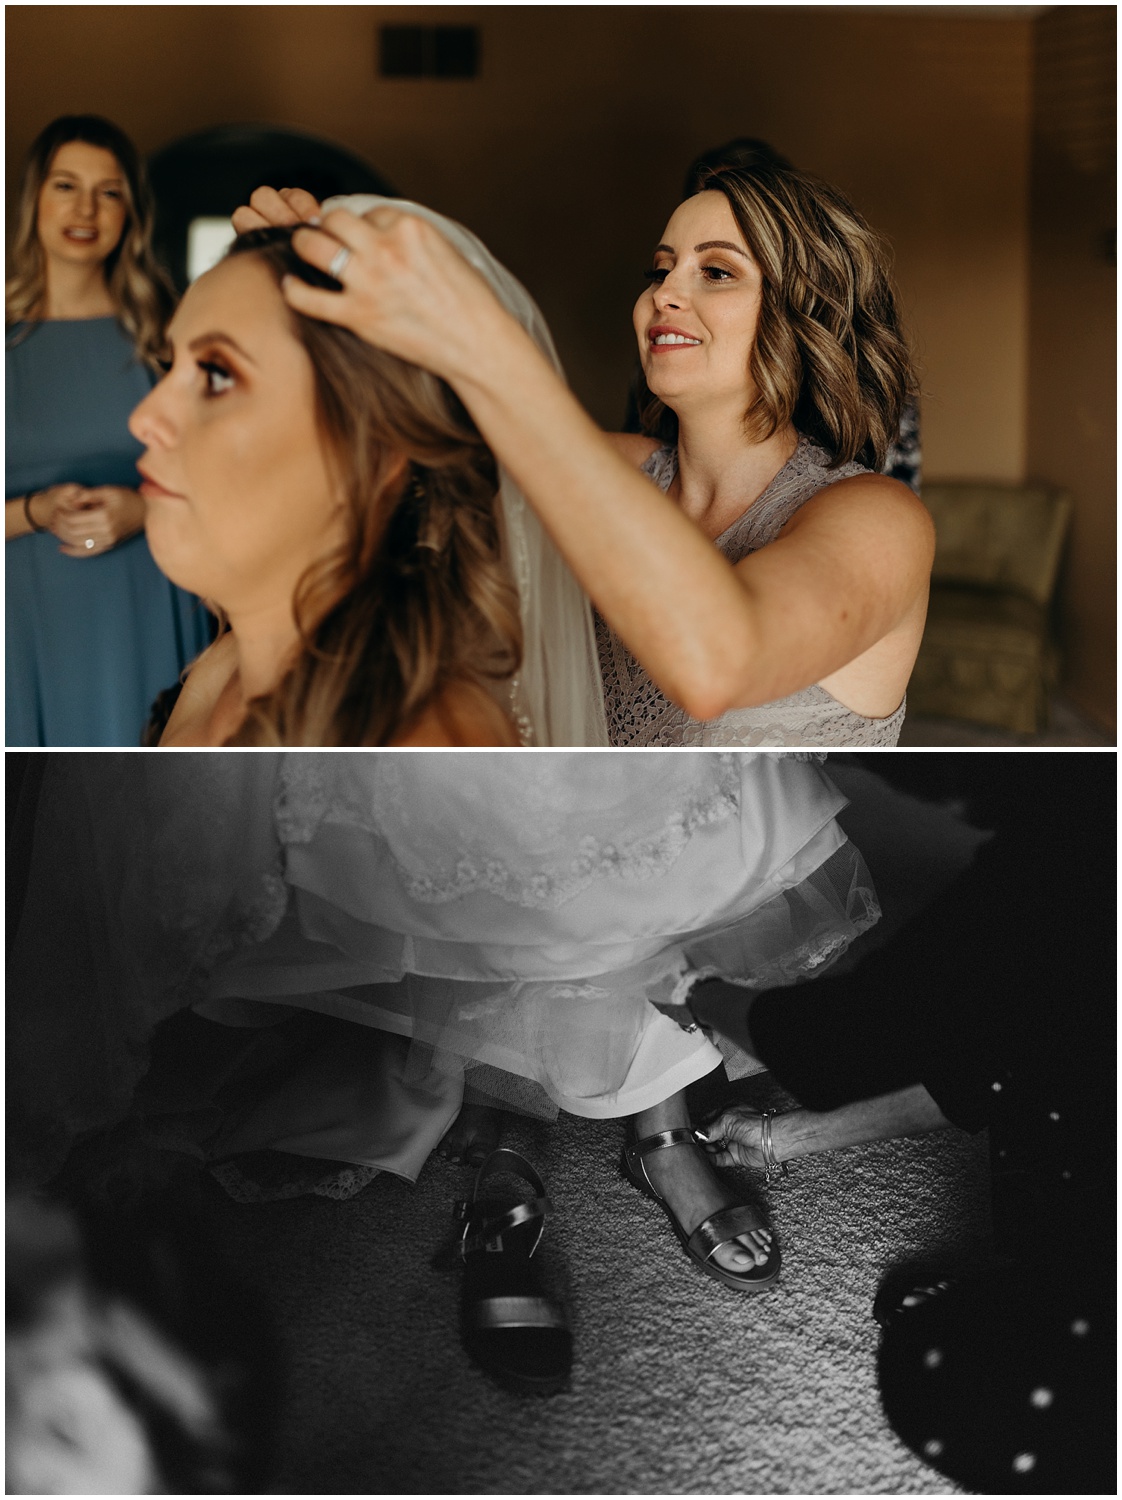 Candid moments of the Bride and groom getting ready on their wedding day.